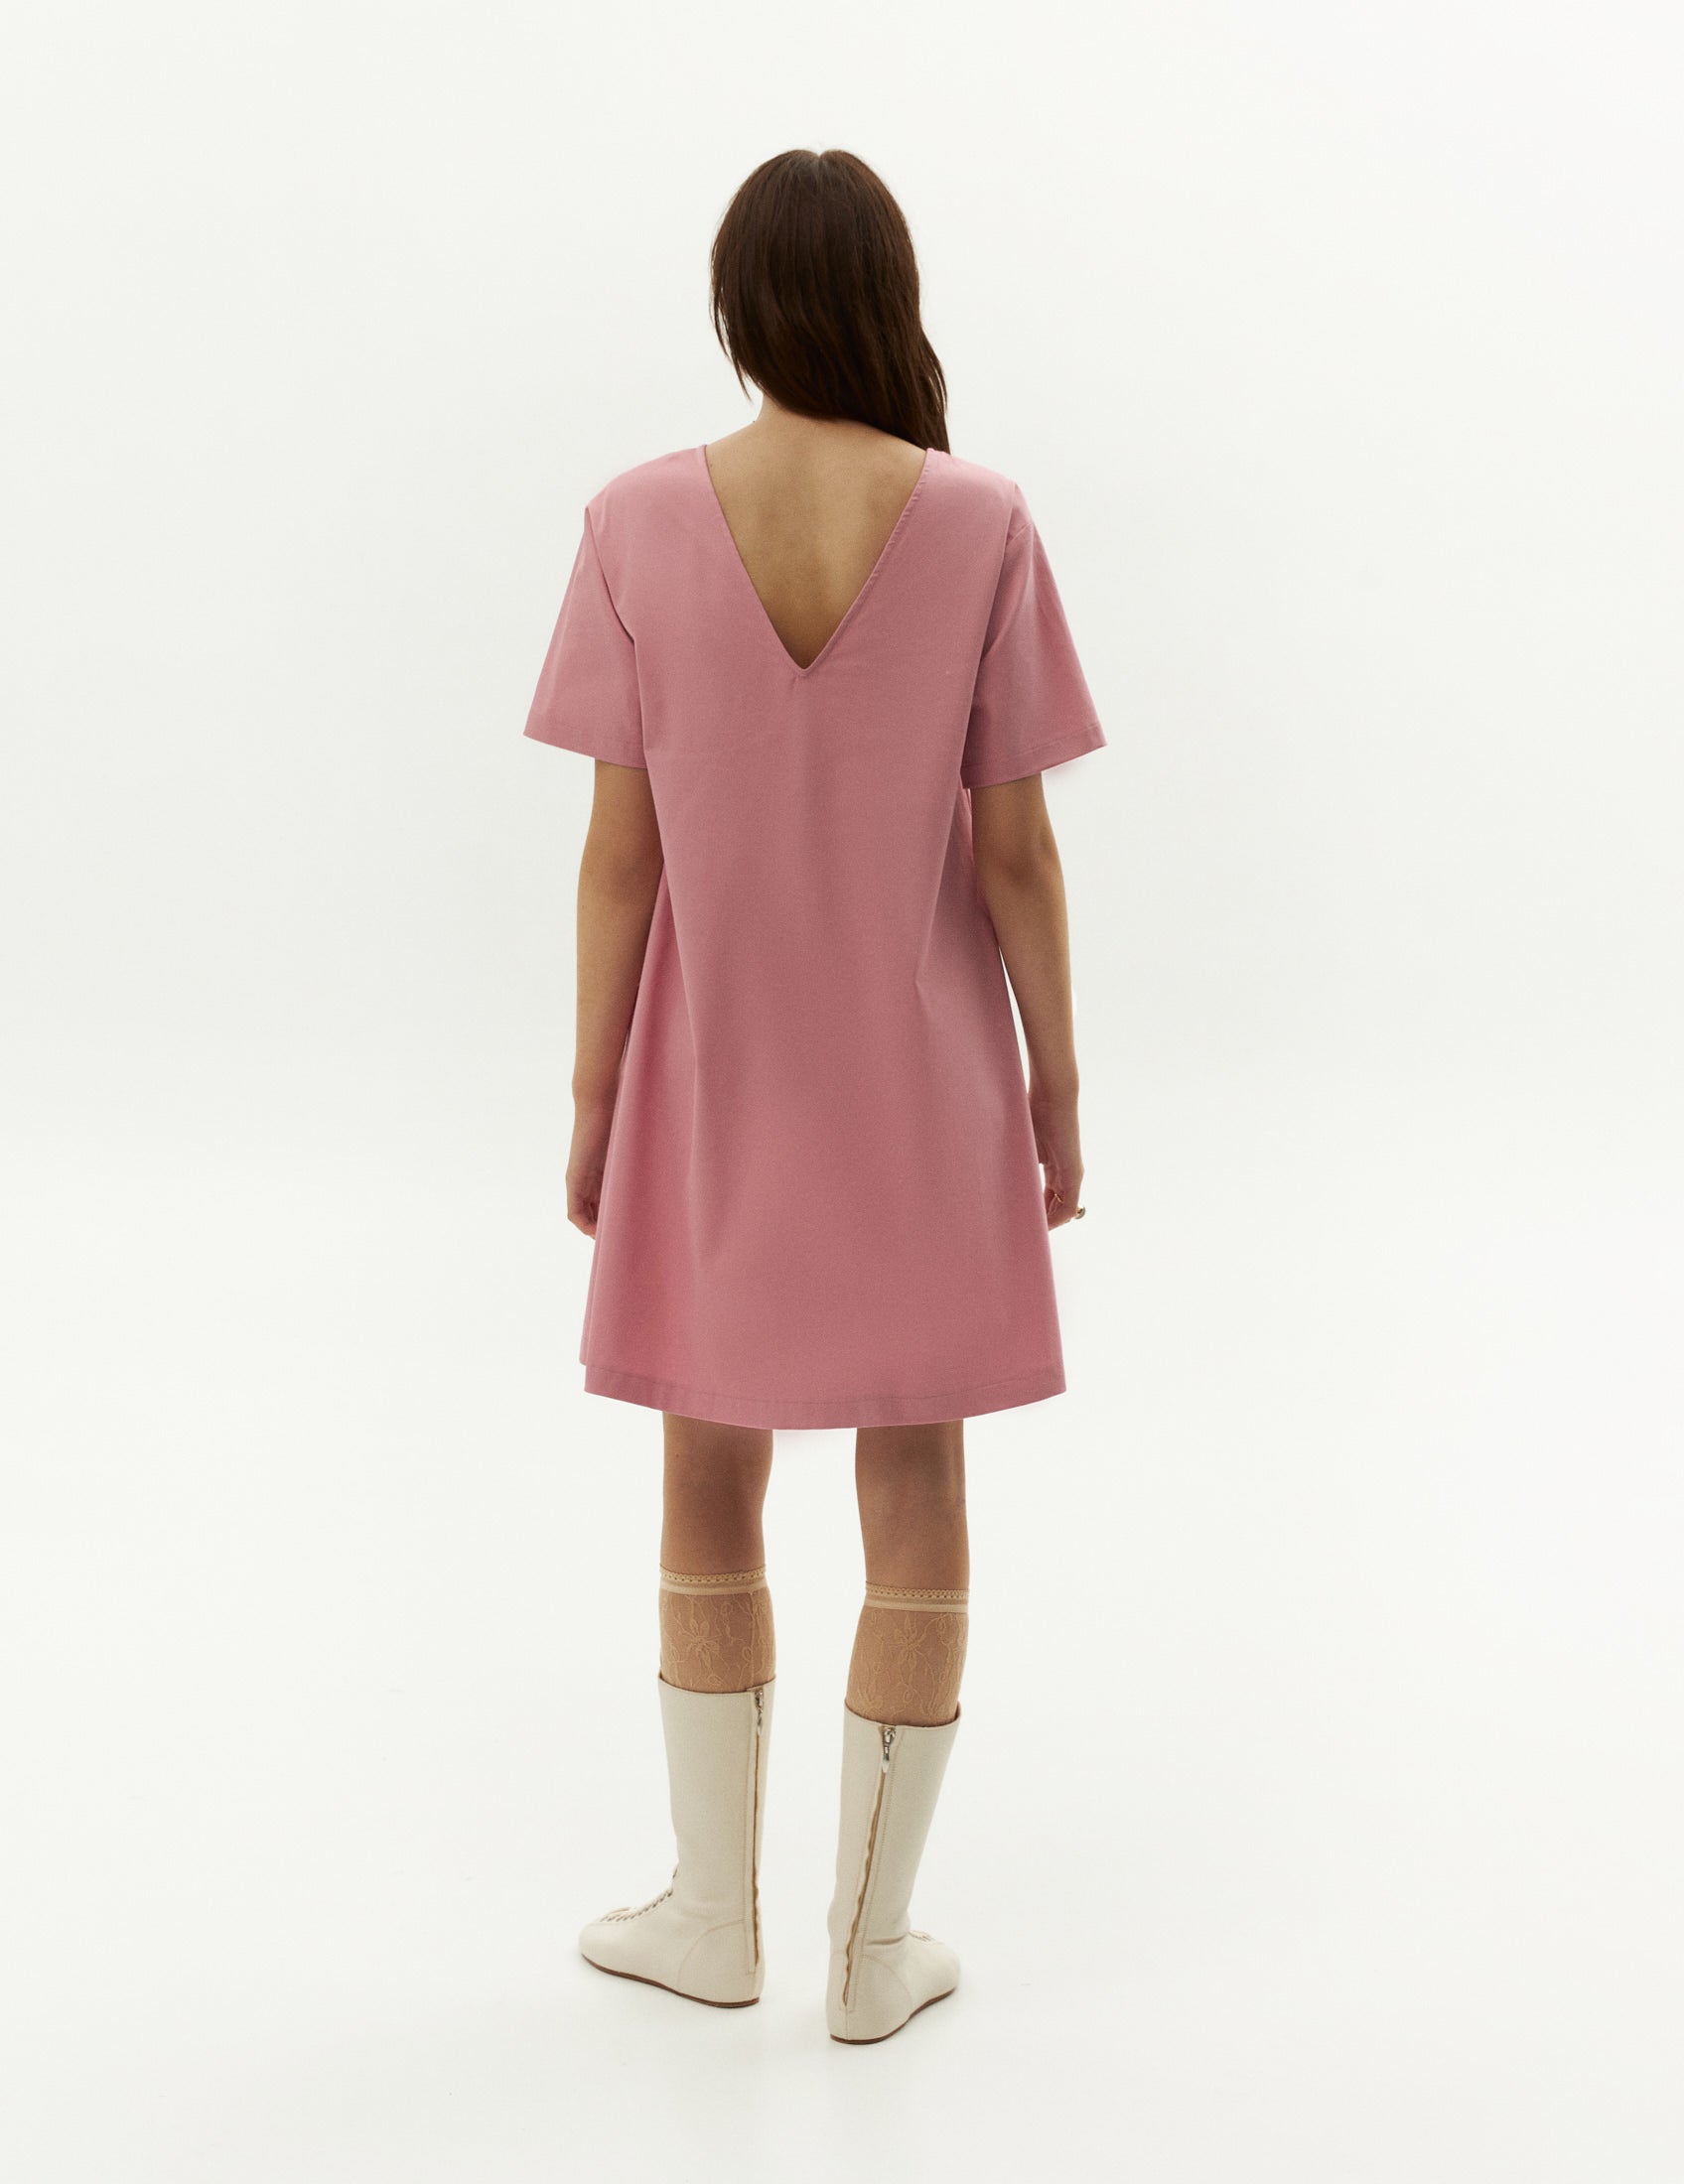 Day dress with open back in pink color. Everyday outfit. FORNA brand shop online